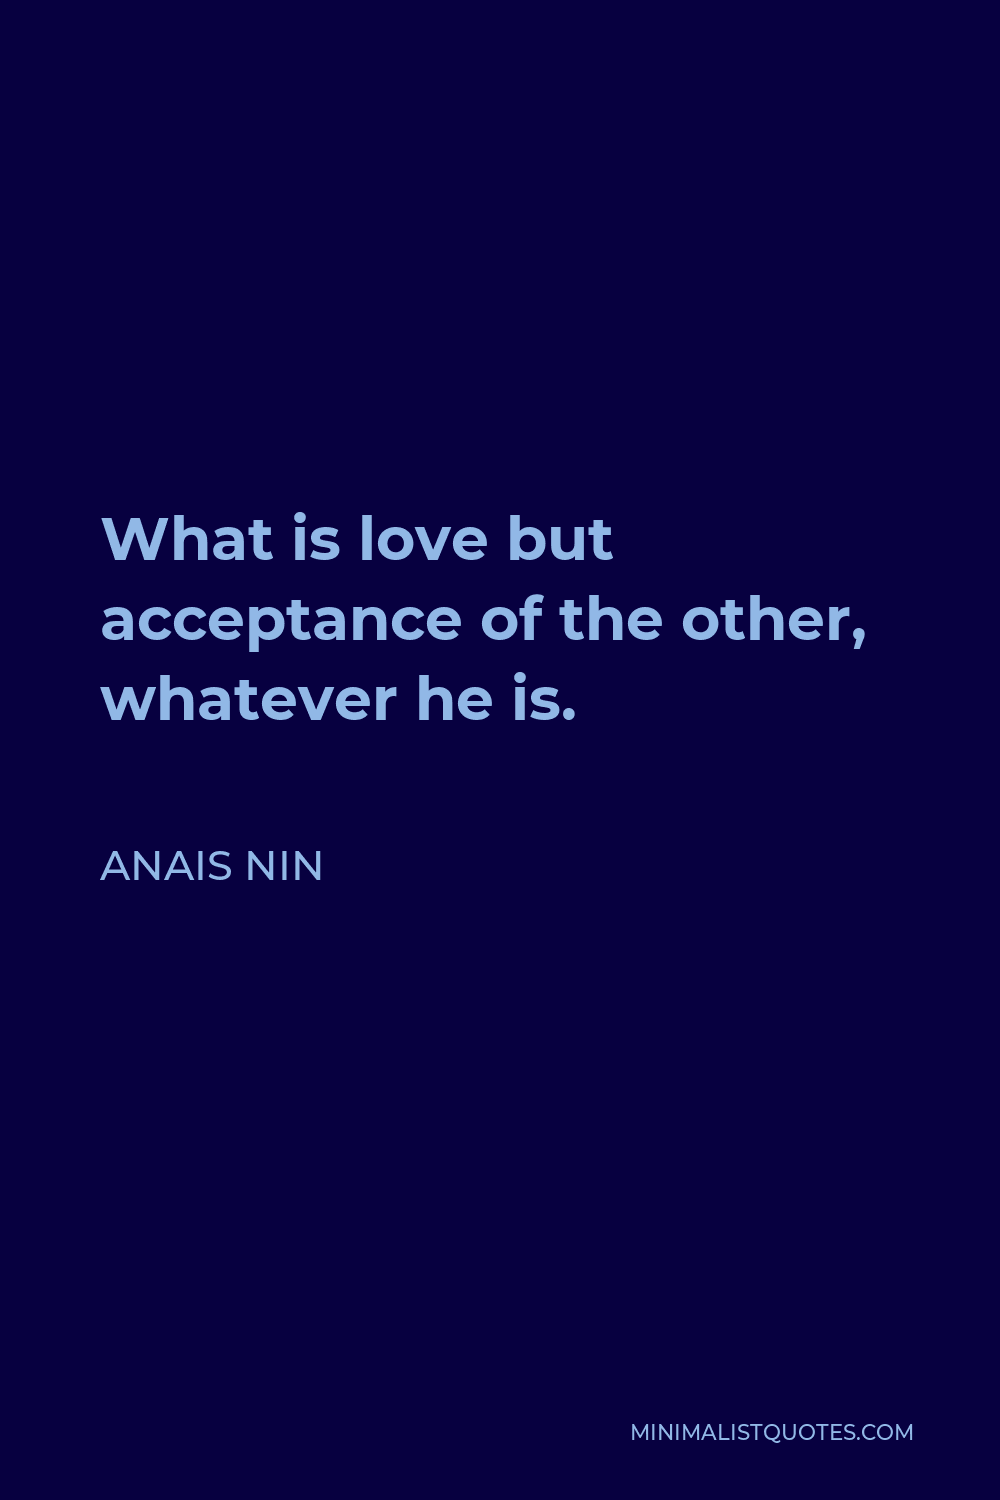 Anais Nin Quote - What is love but acceptance of the other, whatever he is.